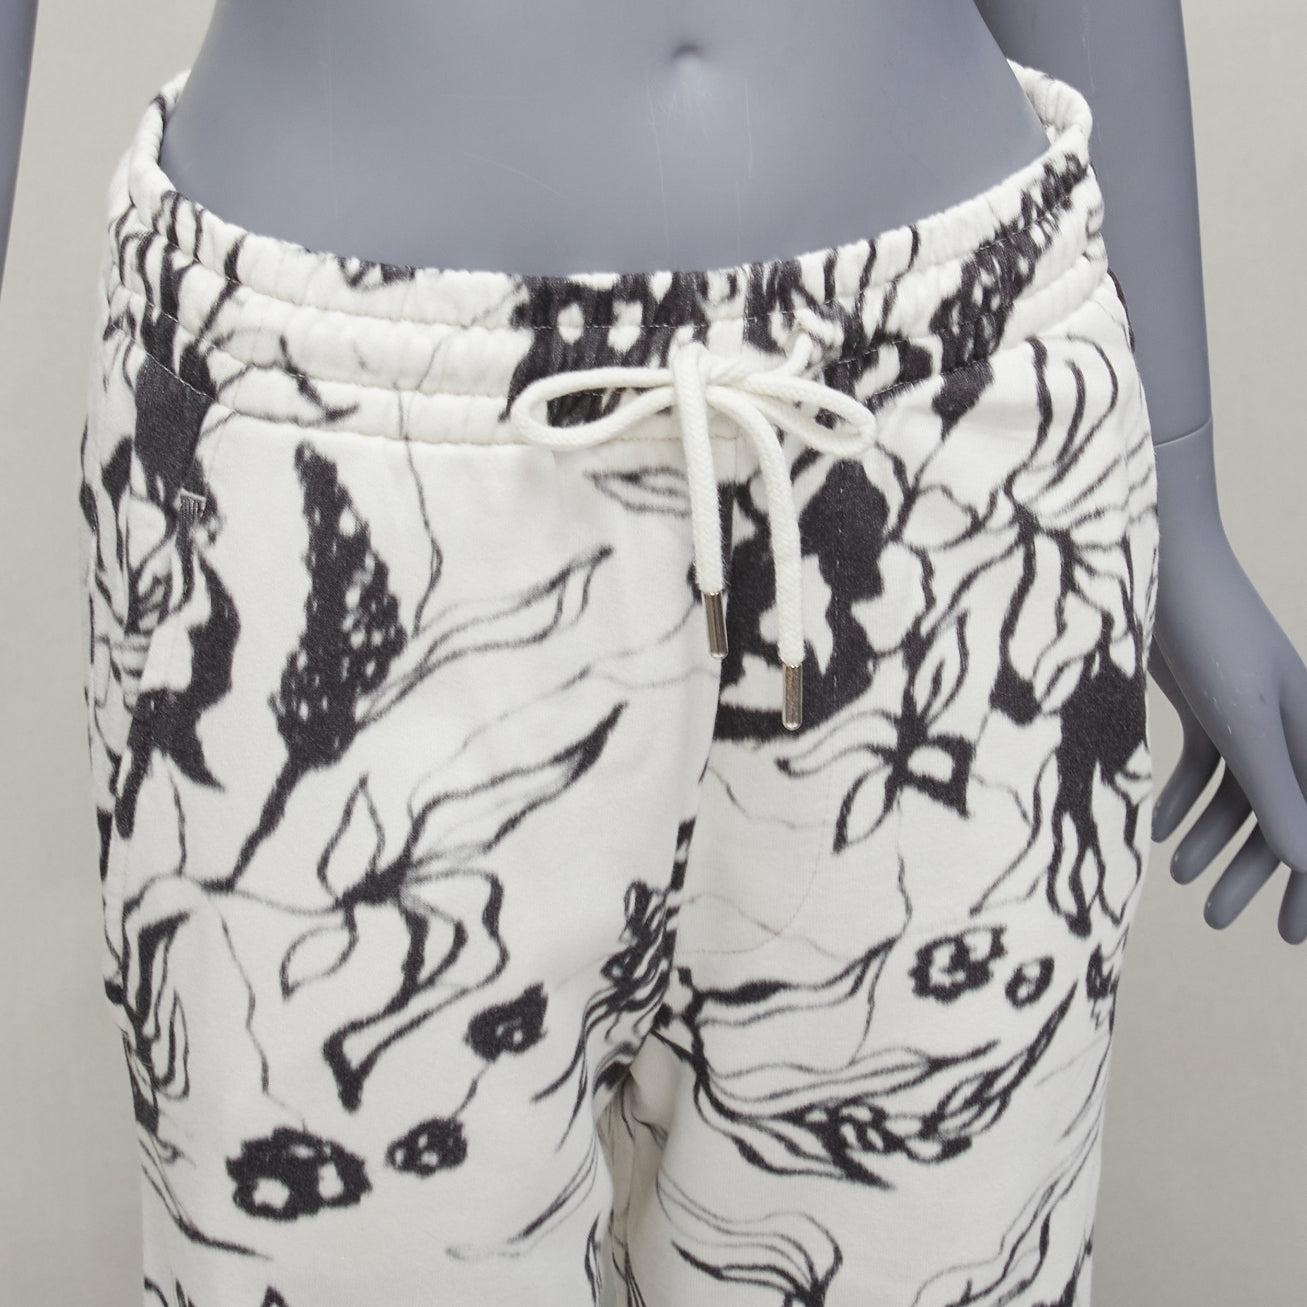 DRIES VAN NOTEN black white cotton blurry abstract floral print sweatpants S
Reference: DYTG/A00068
Brand: Dries Van Noten
Material: Cotton
Color: White, Black
Pattern: Floral
Closure: Drawstring
Made in: Turkey

CONDITION:
Condition: Very good,